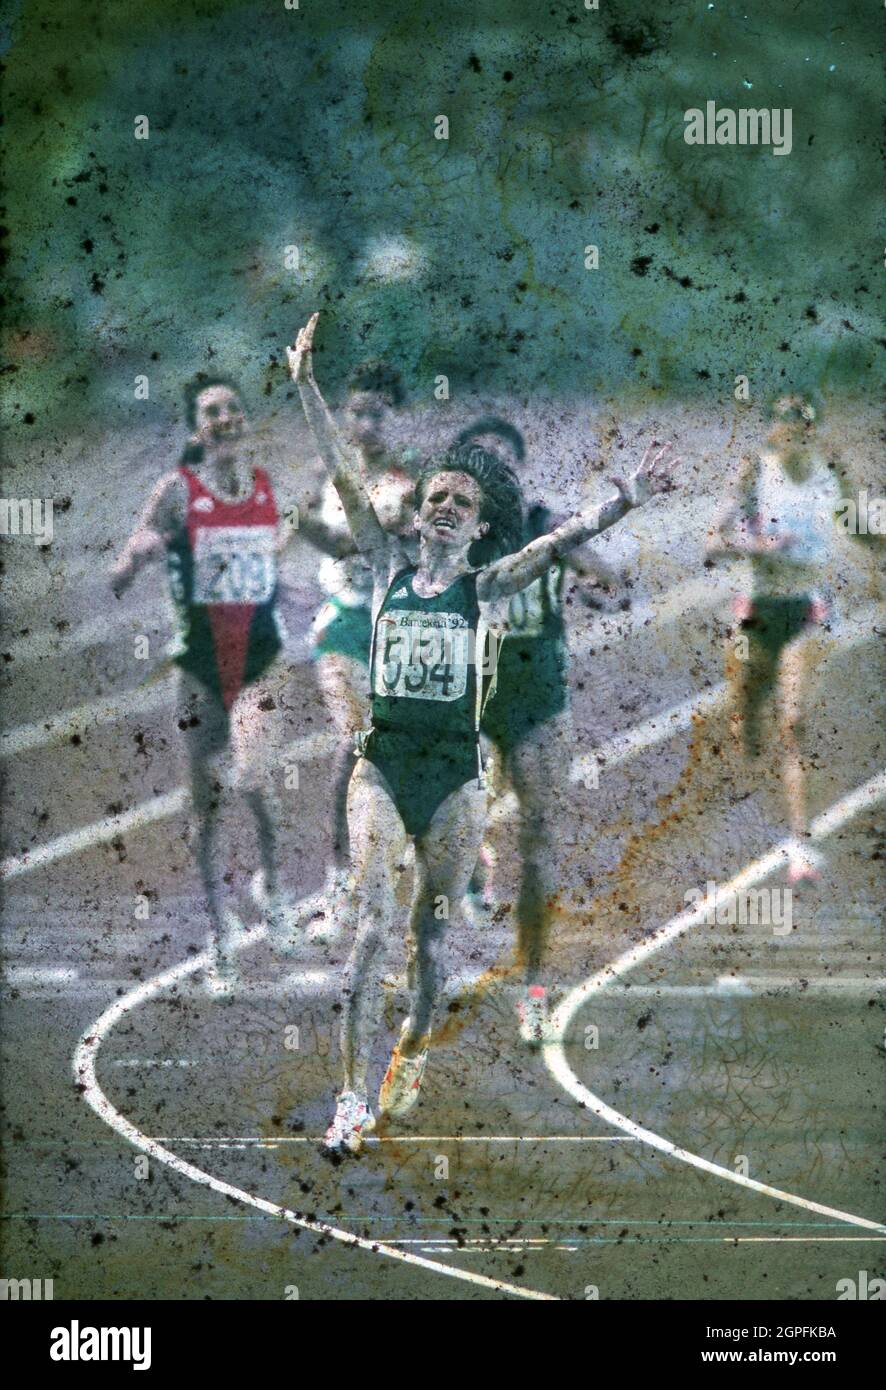 Barcelona Spain 1992: Elena Romanova of the Unified Team celebrates as she crosses the finish line in first place of the women's 3,000-meter race during the 1992 Summer Olympics. ©Bob Daemmrich. Stock Photo